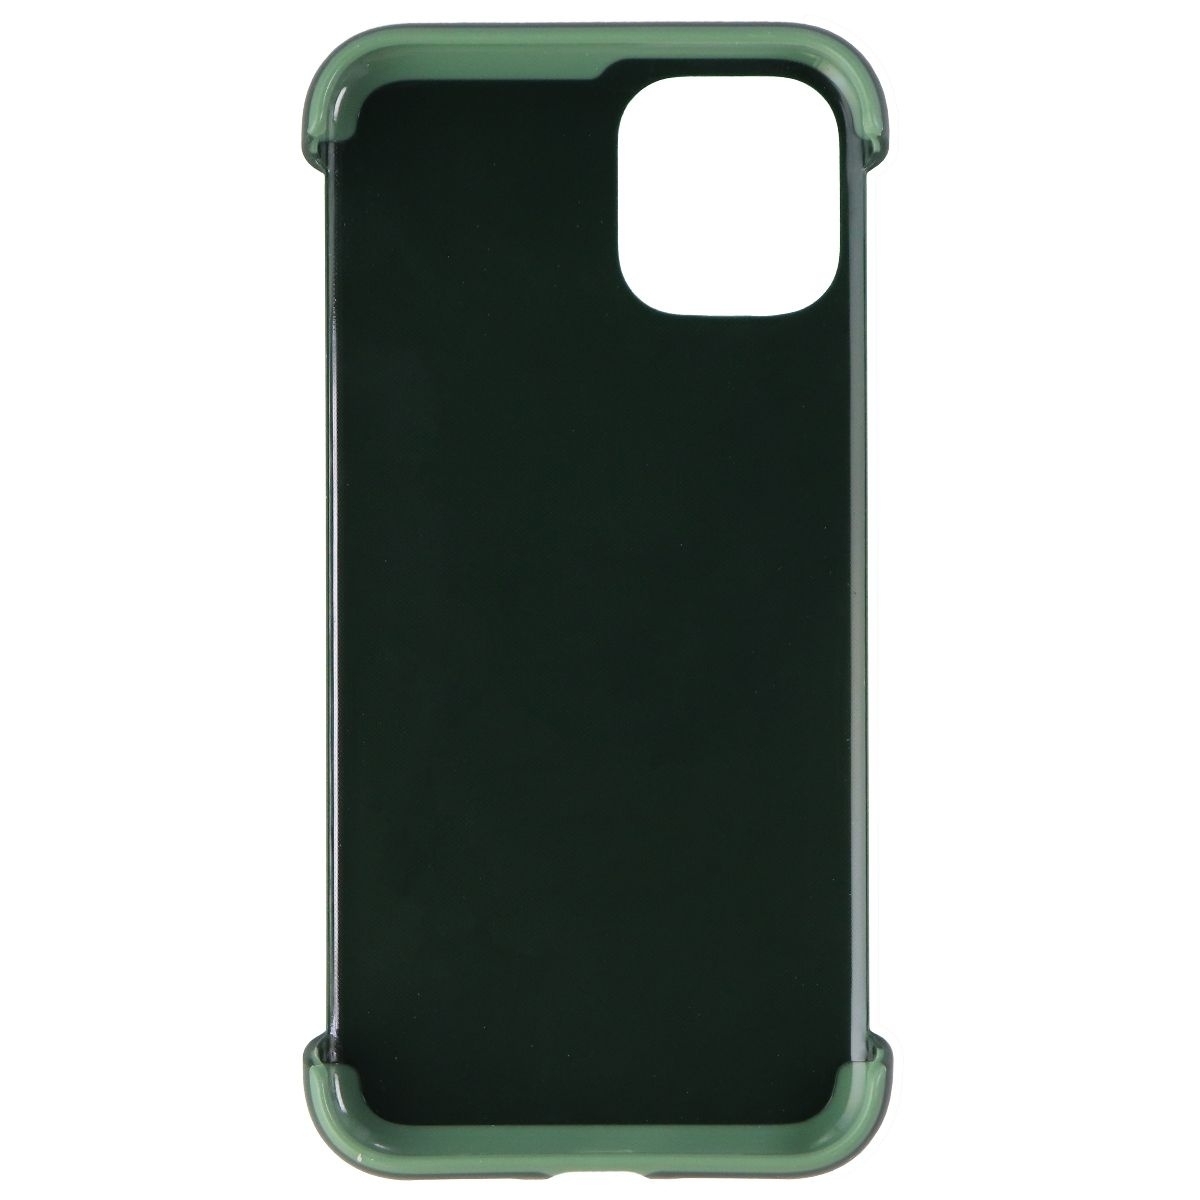 Skech Stark Series Minimal Protection Case For Apple IPhone 11 Pro - Moss